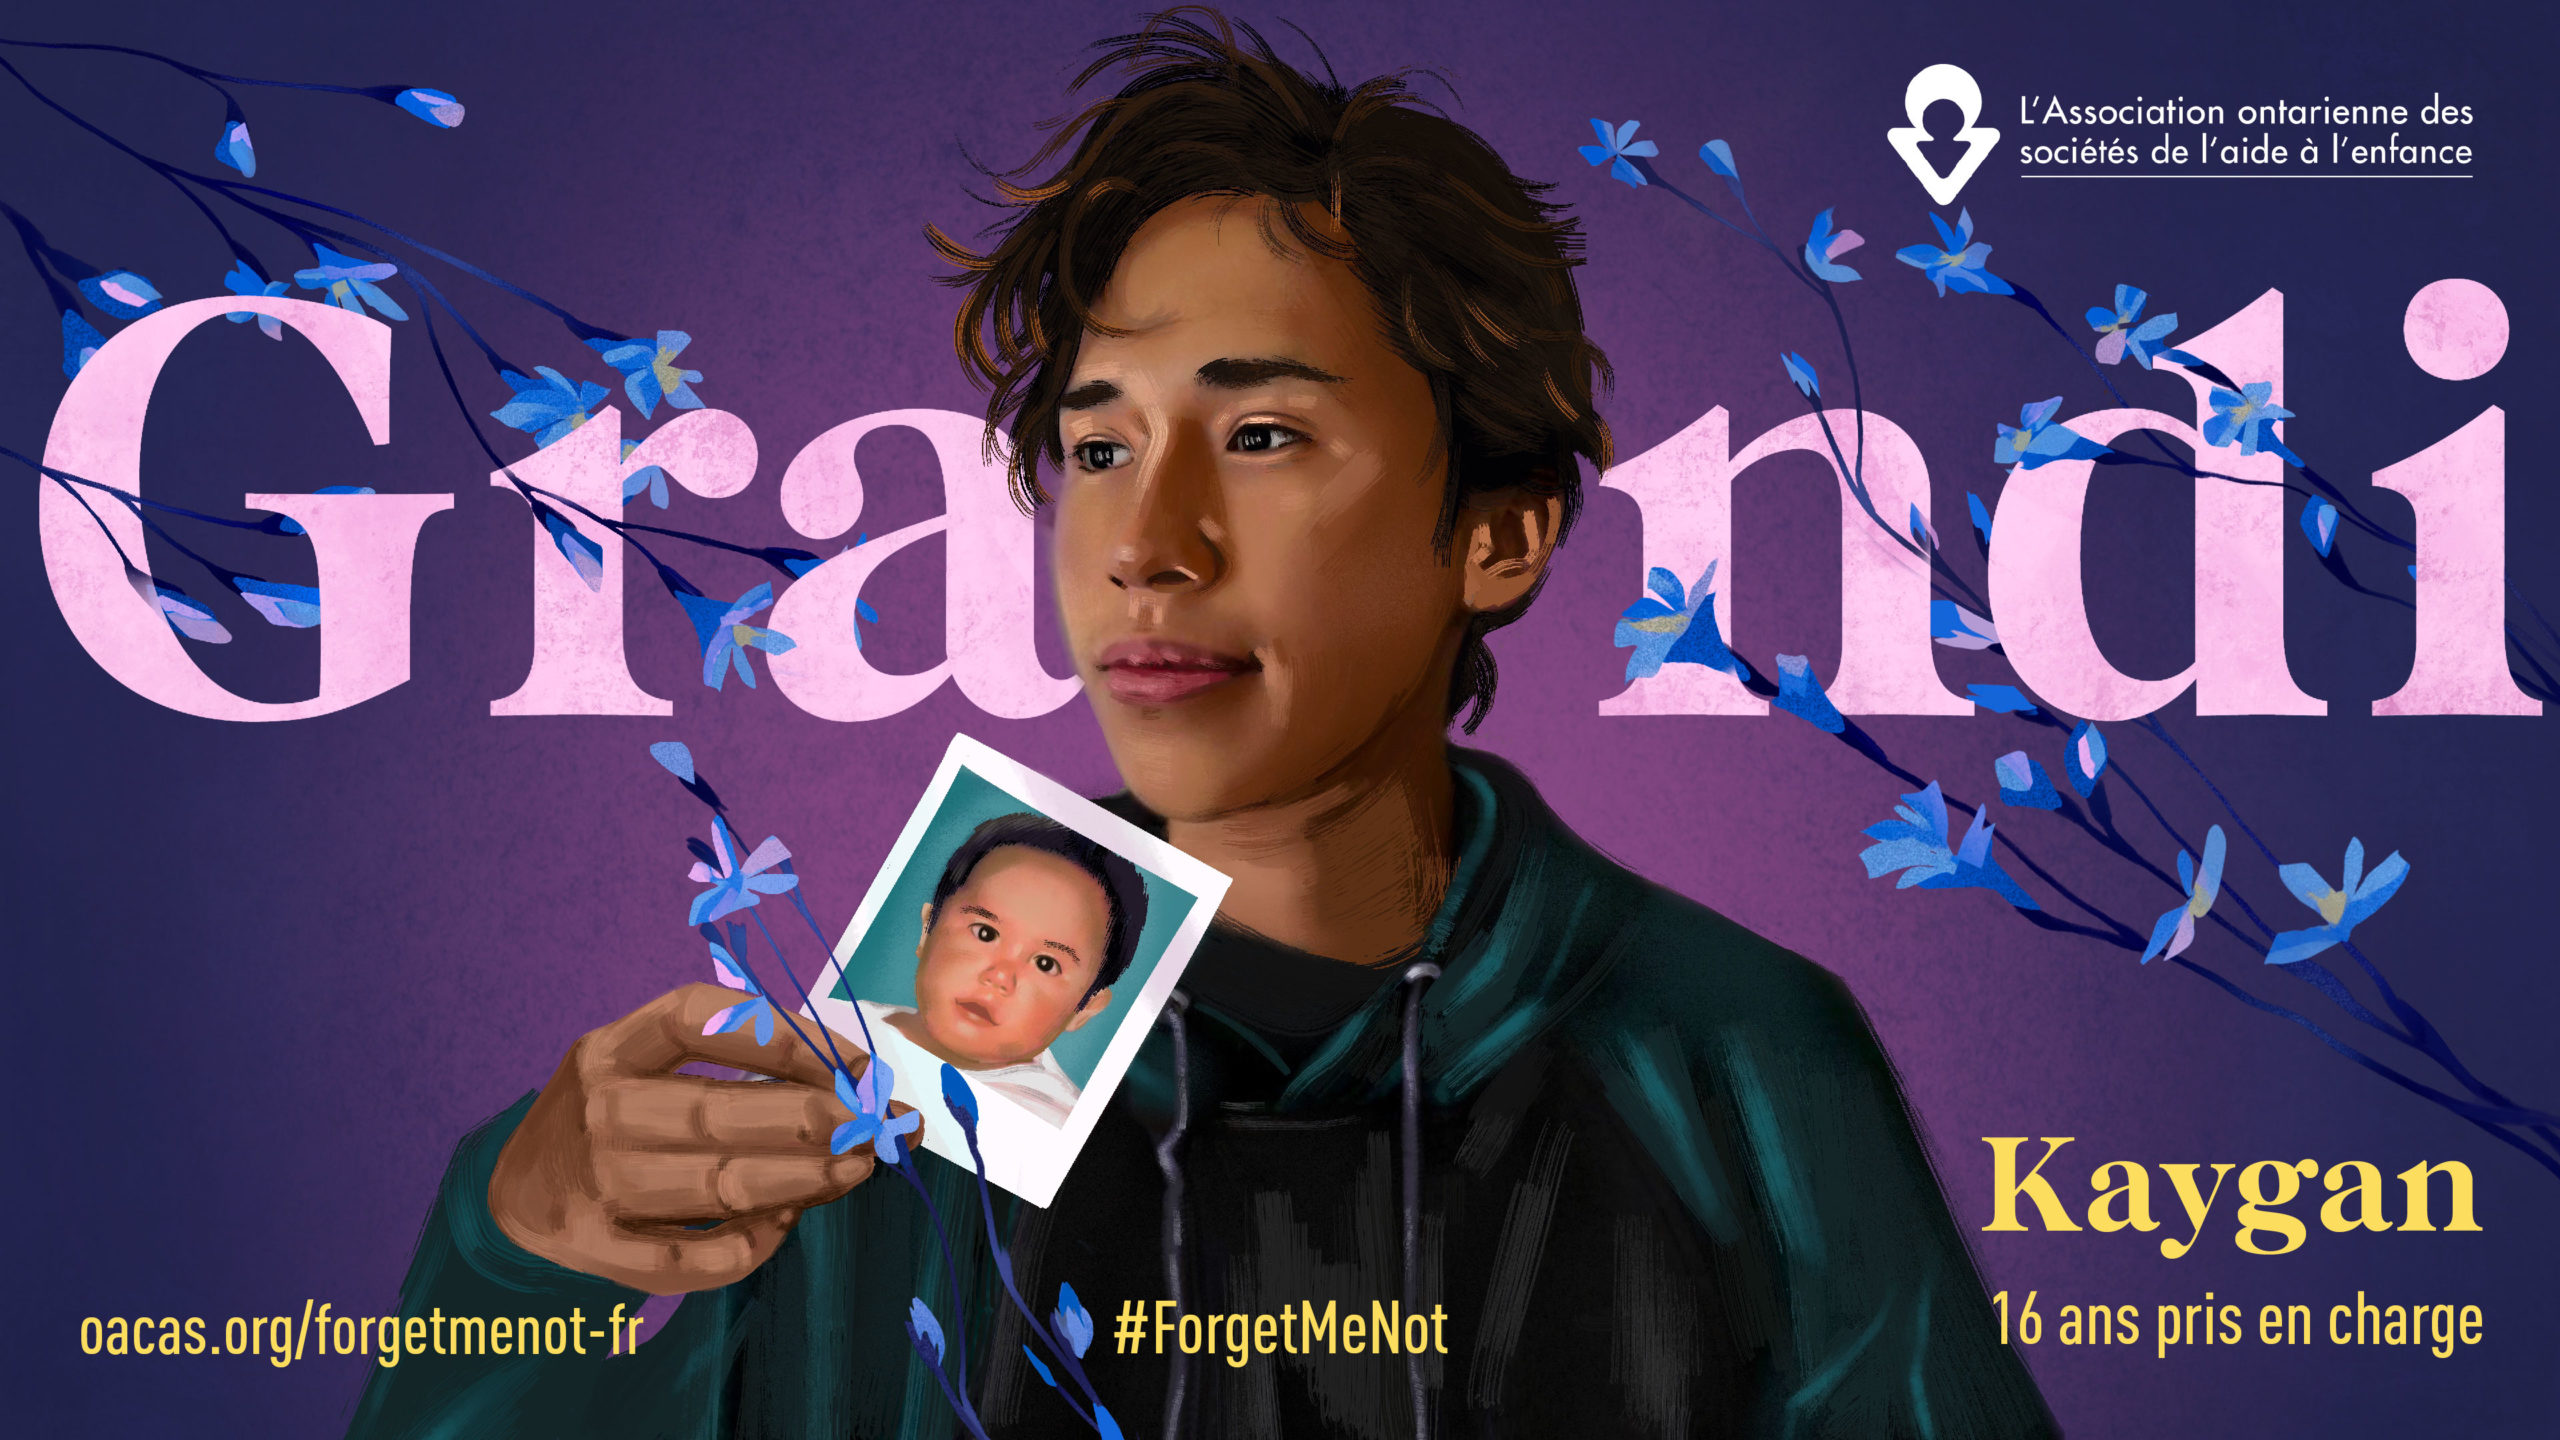 ILLUSTRATION OF INDIGENOUS MAN HOLDING A POLAROID OF A BABY PHOTO WITH WORDS GROWN BEHIND HIM